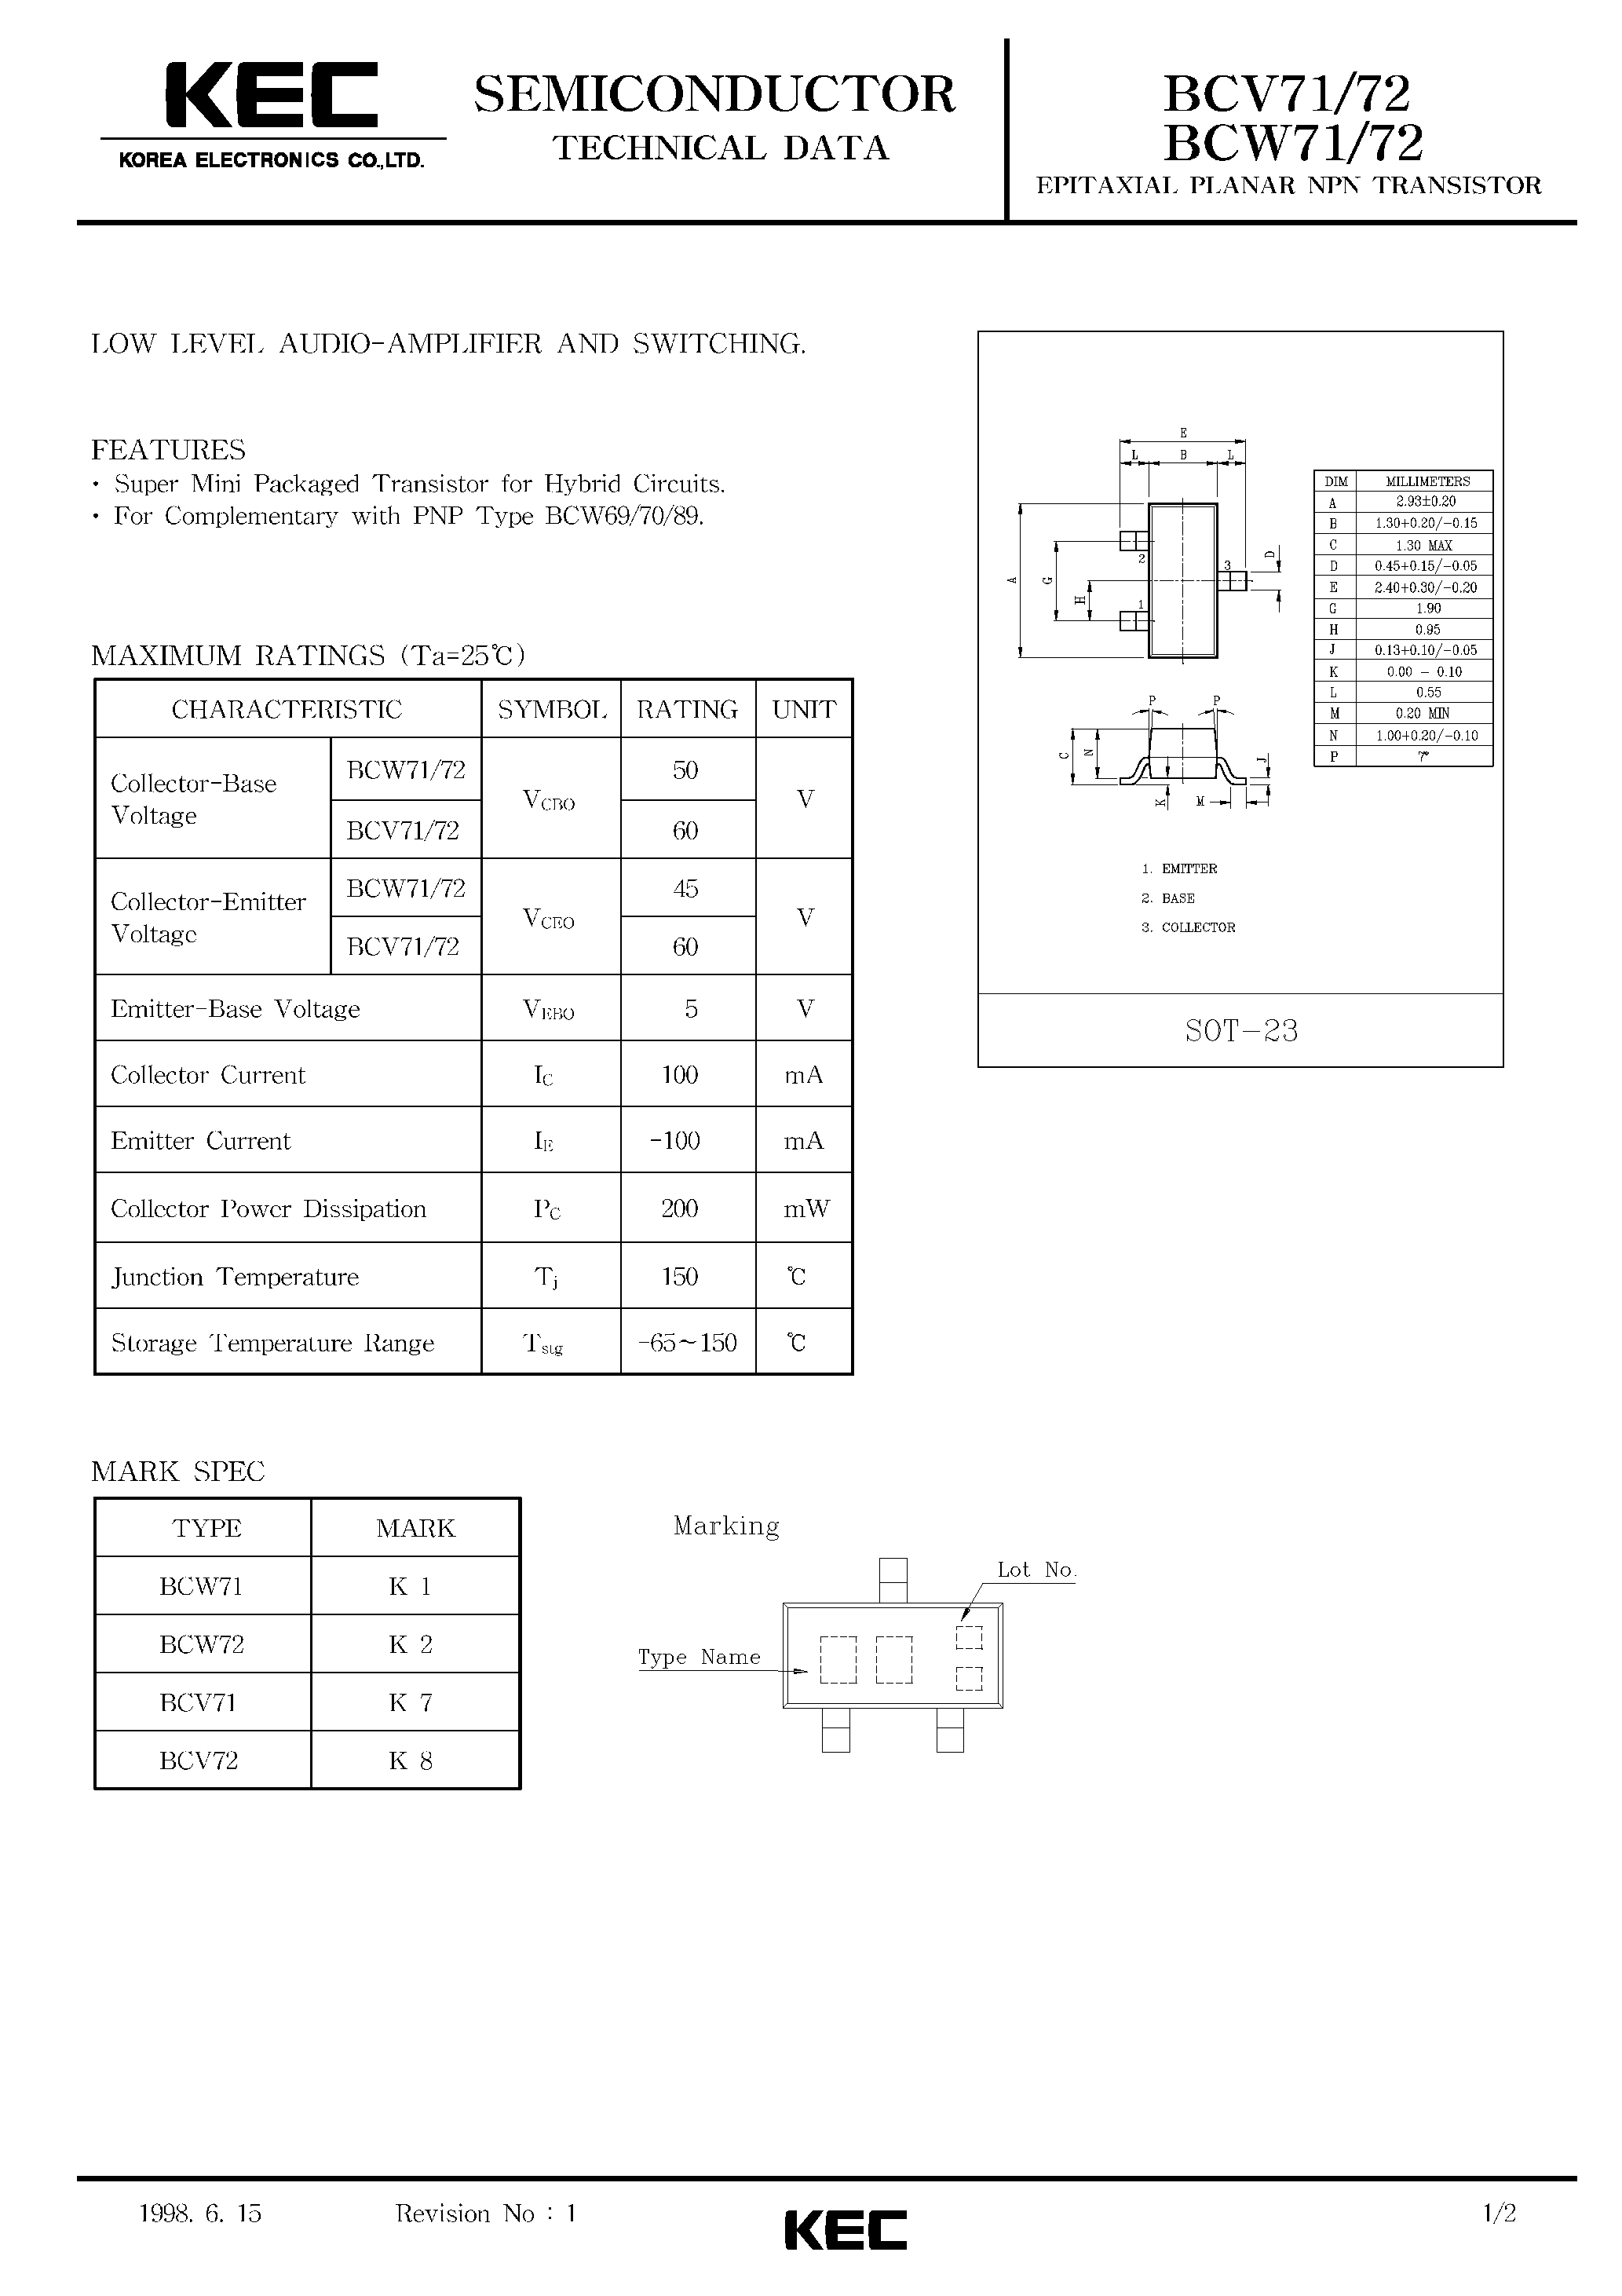 Datasheet BCW71 - EPITAXIAL PLANAR NPN TRANSISTOR (LOW LEVEL AUDIO-AMPLIFIER AND SWITCHING) page 1